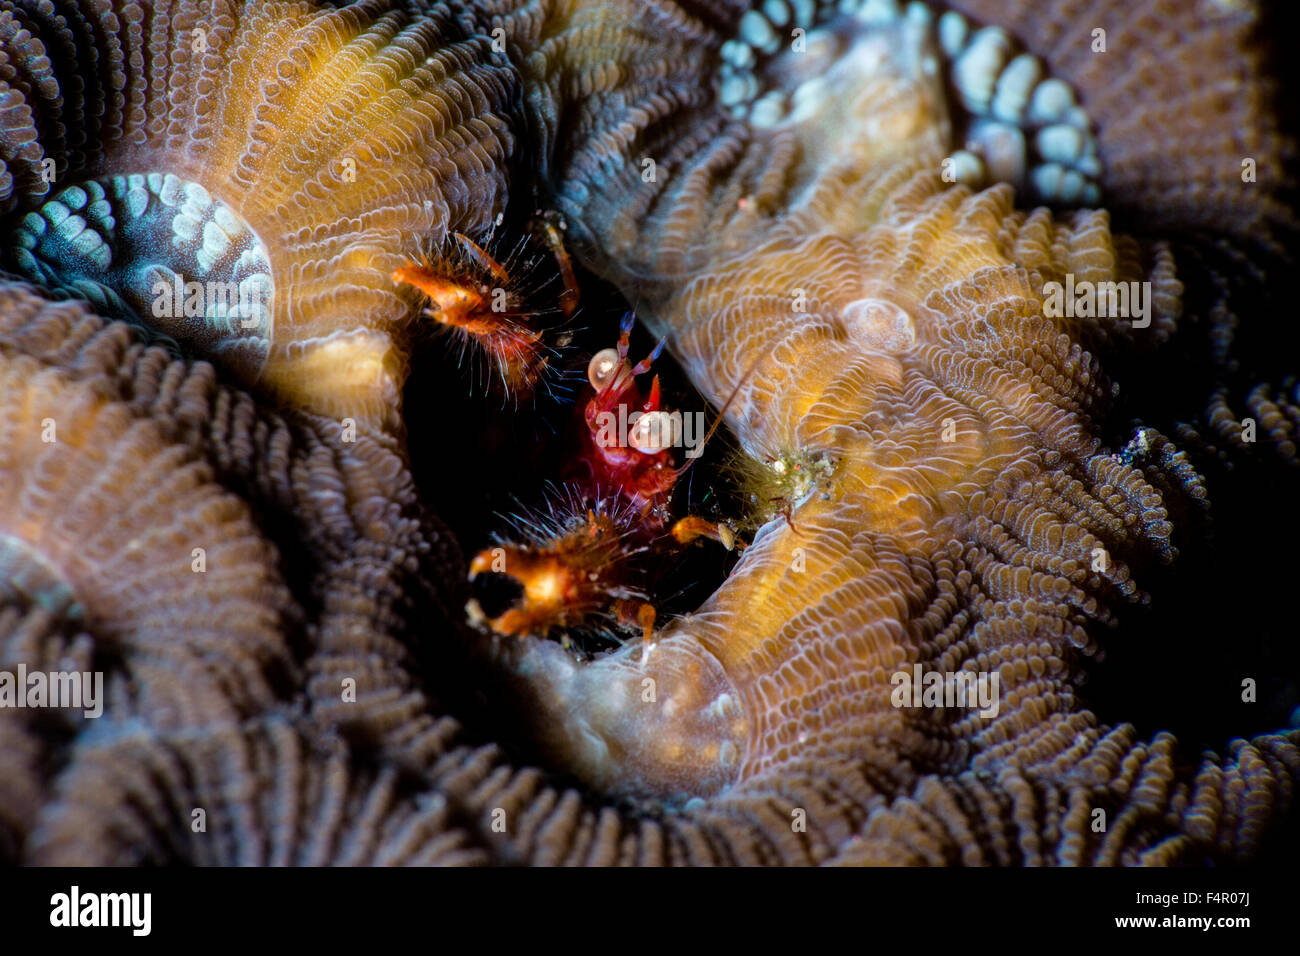 Coral Hermit Crab Peeping Out Stock Photo